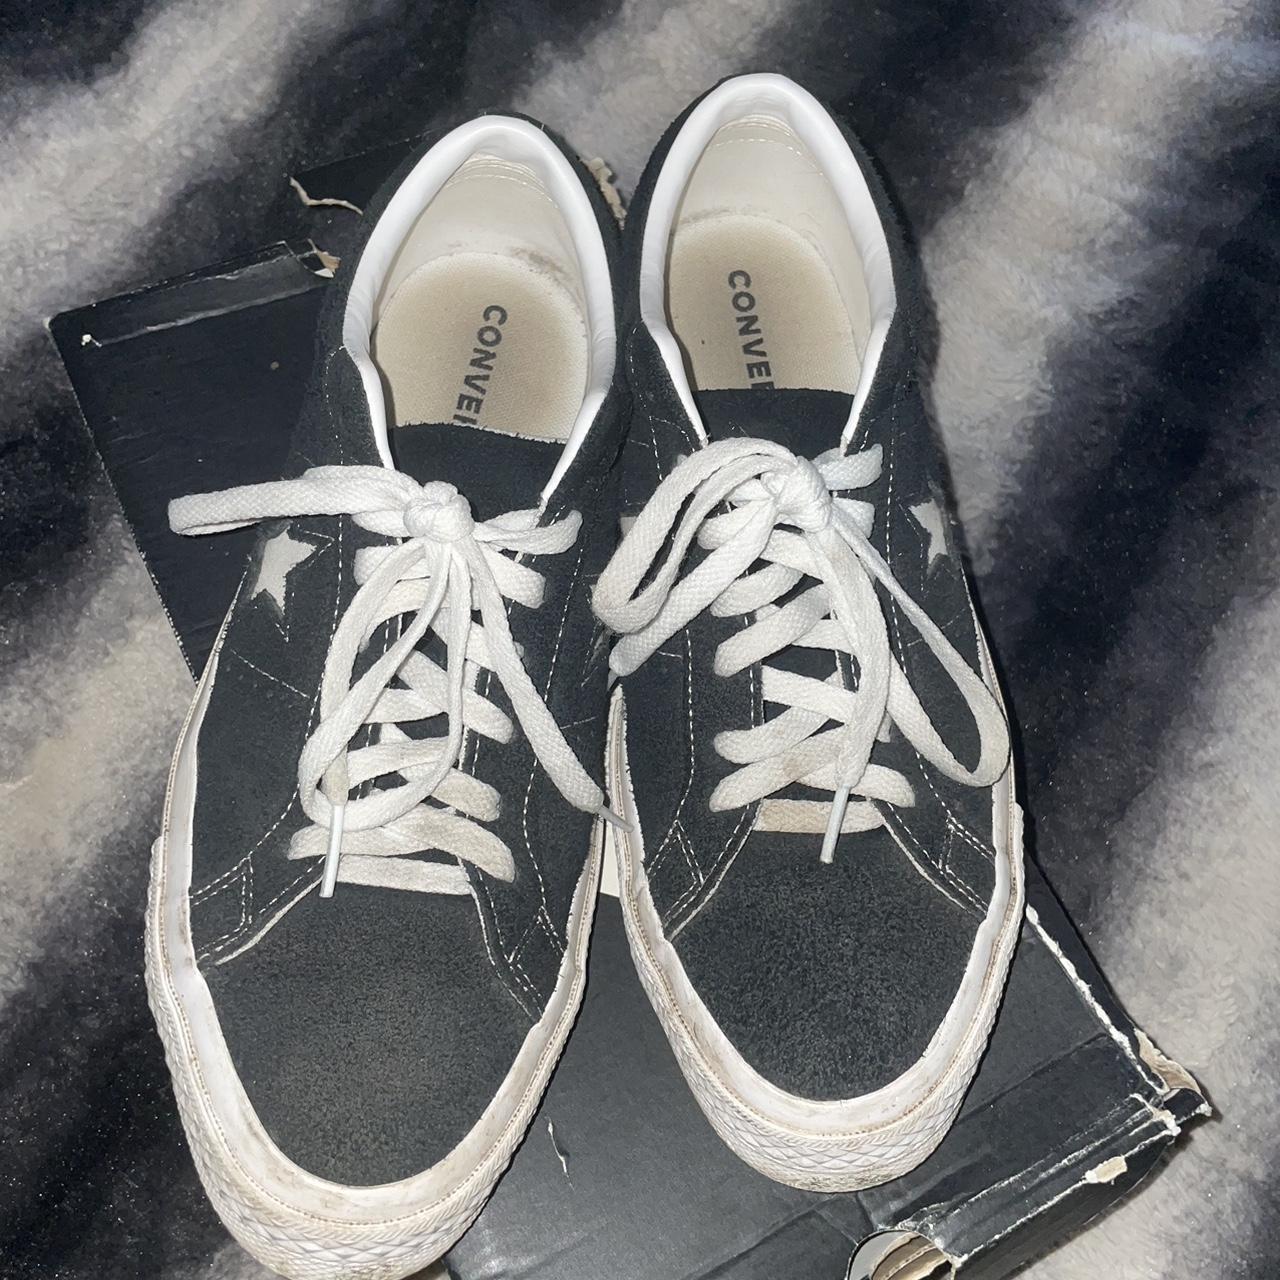 Converse One Star shoes, good condition - Depop